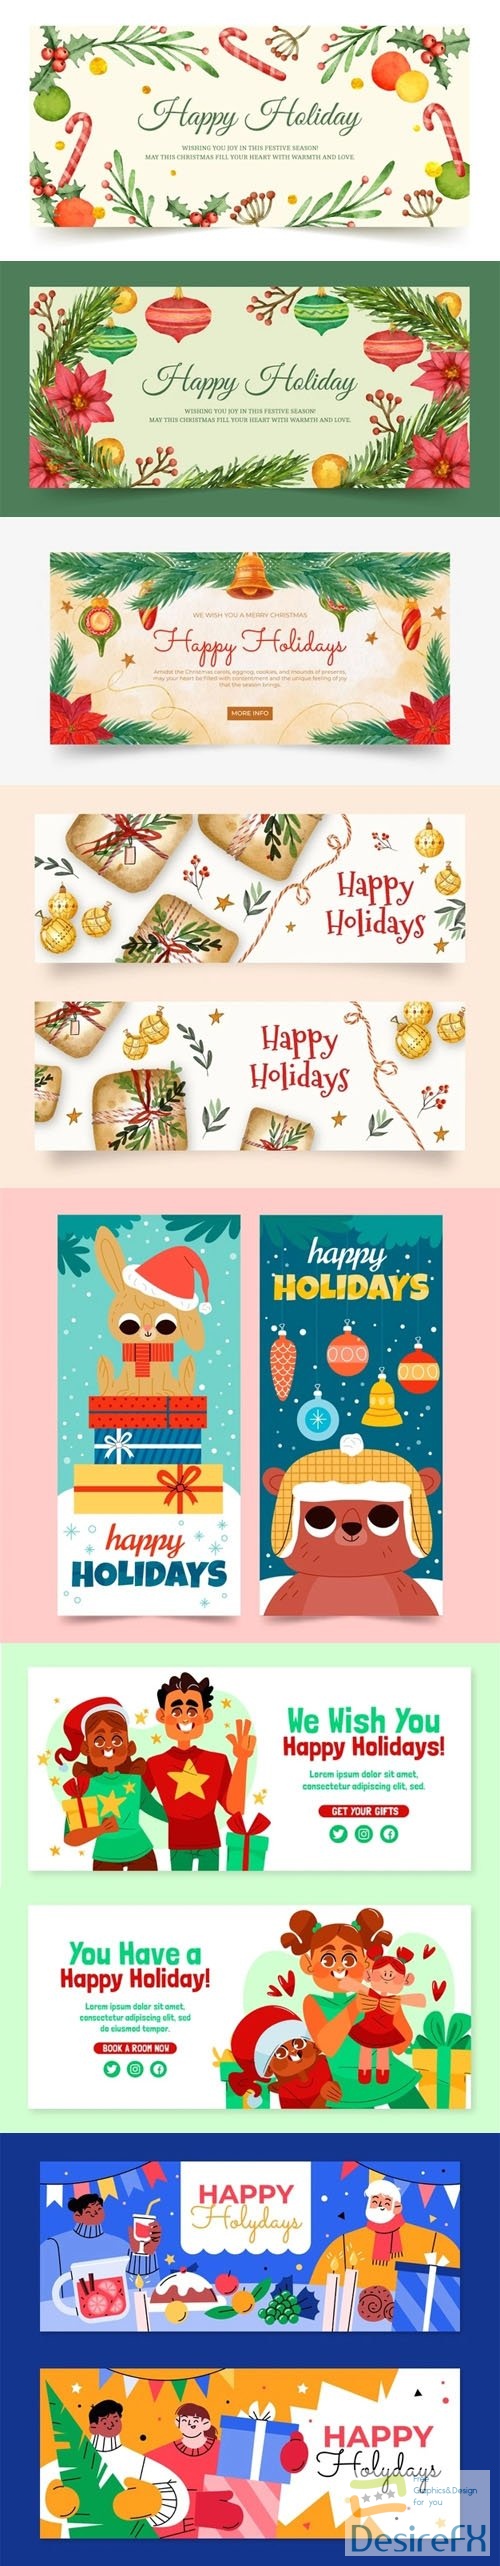 Hand Drawn Happy Holidays Banners Collection Vol.2 - 8 Vector Templates